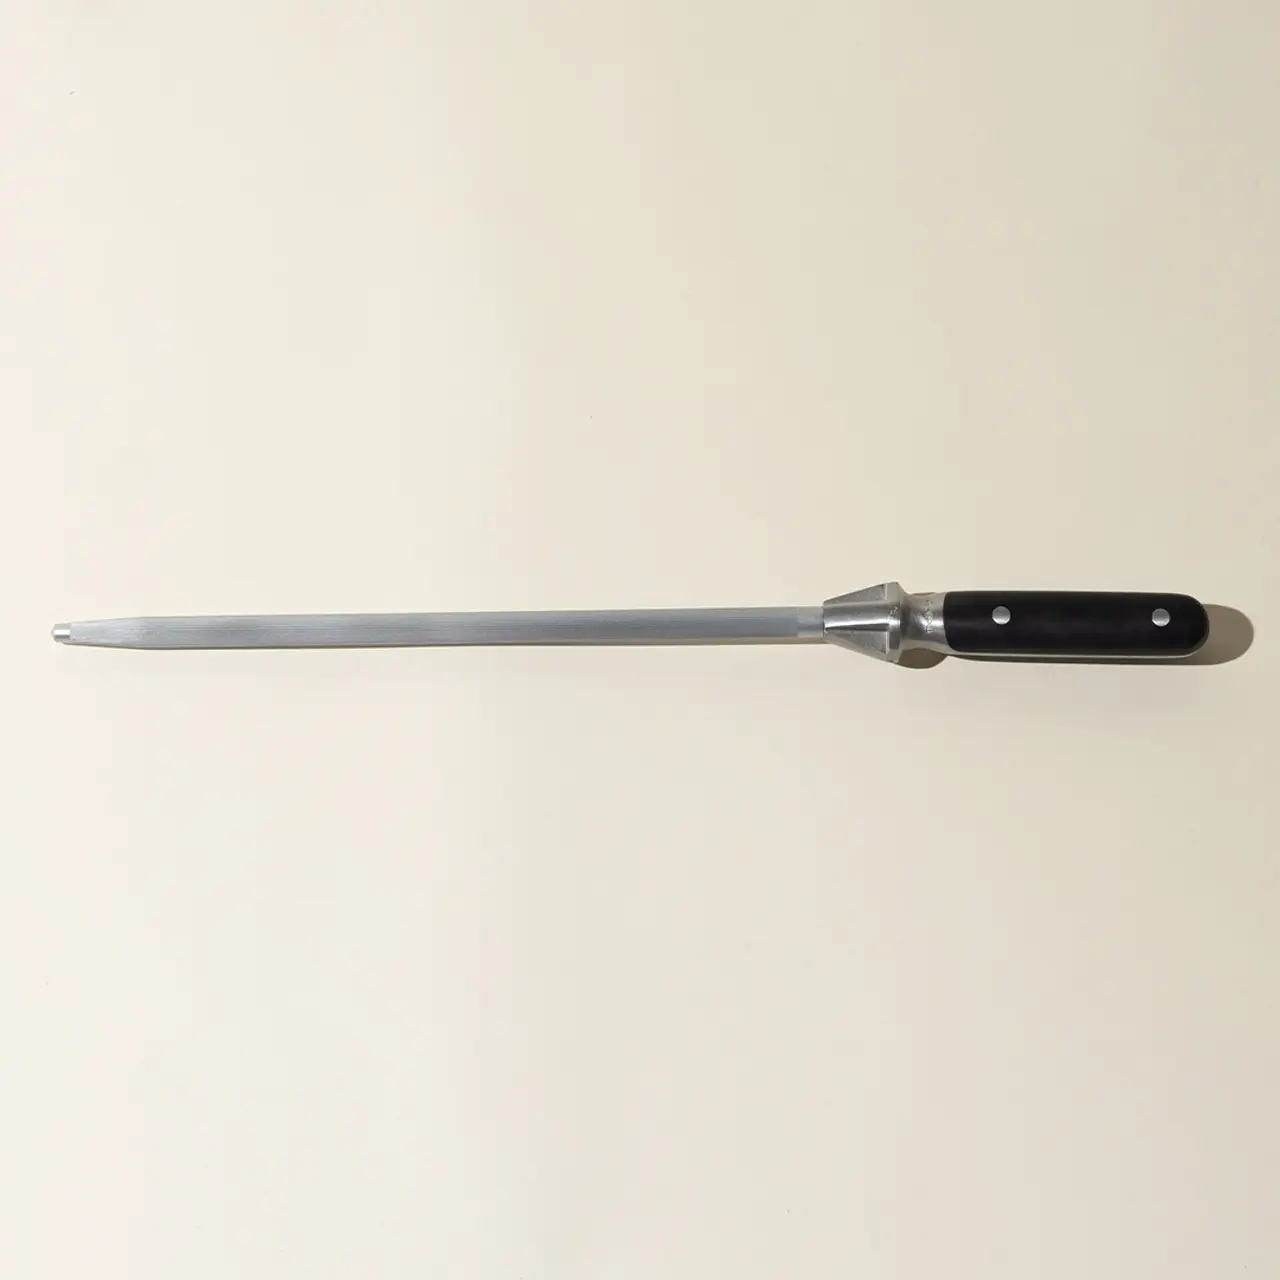 A long steel honing rod with a black handle lies against a neutral background.